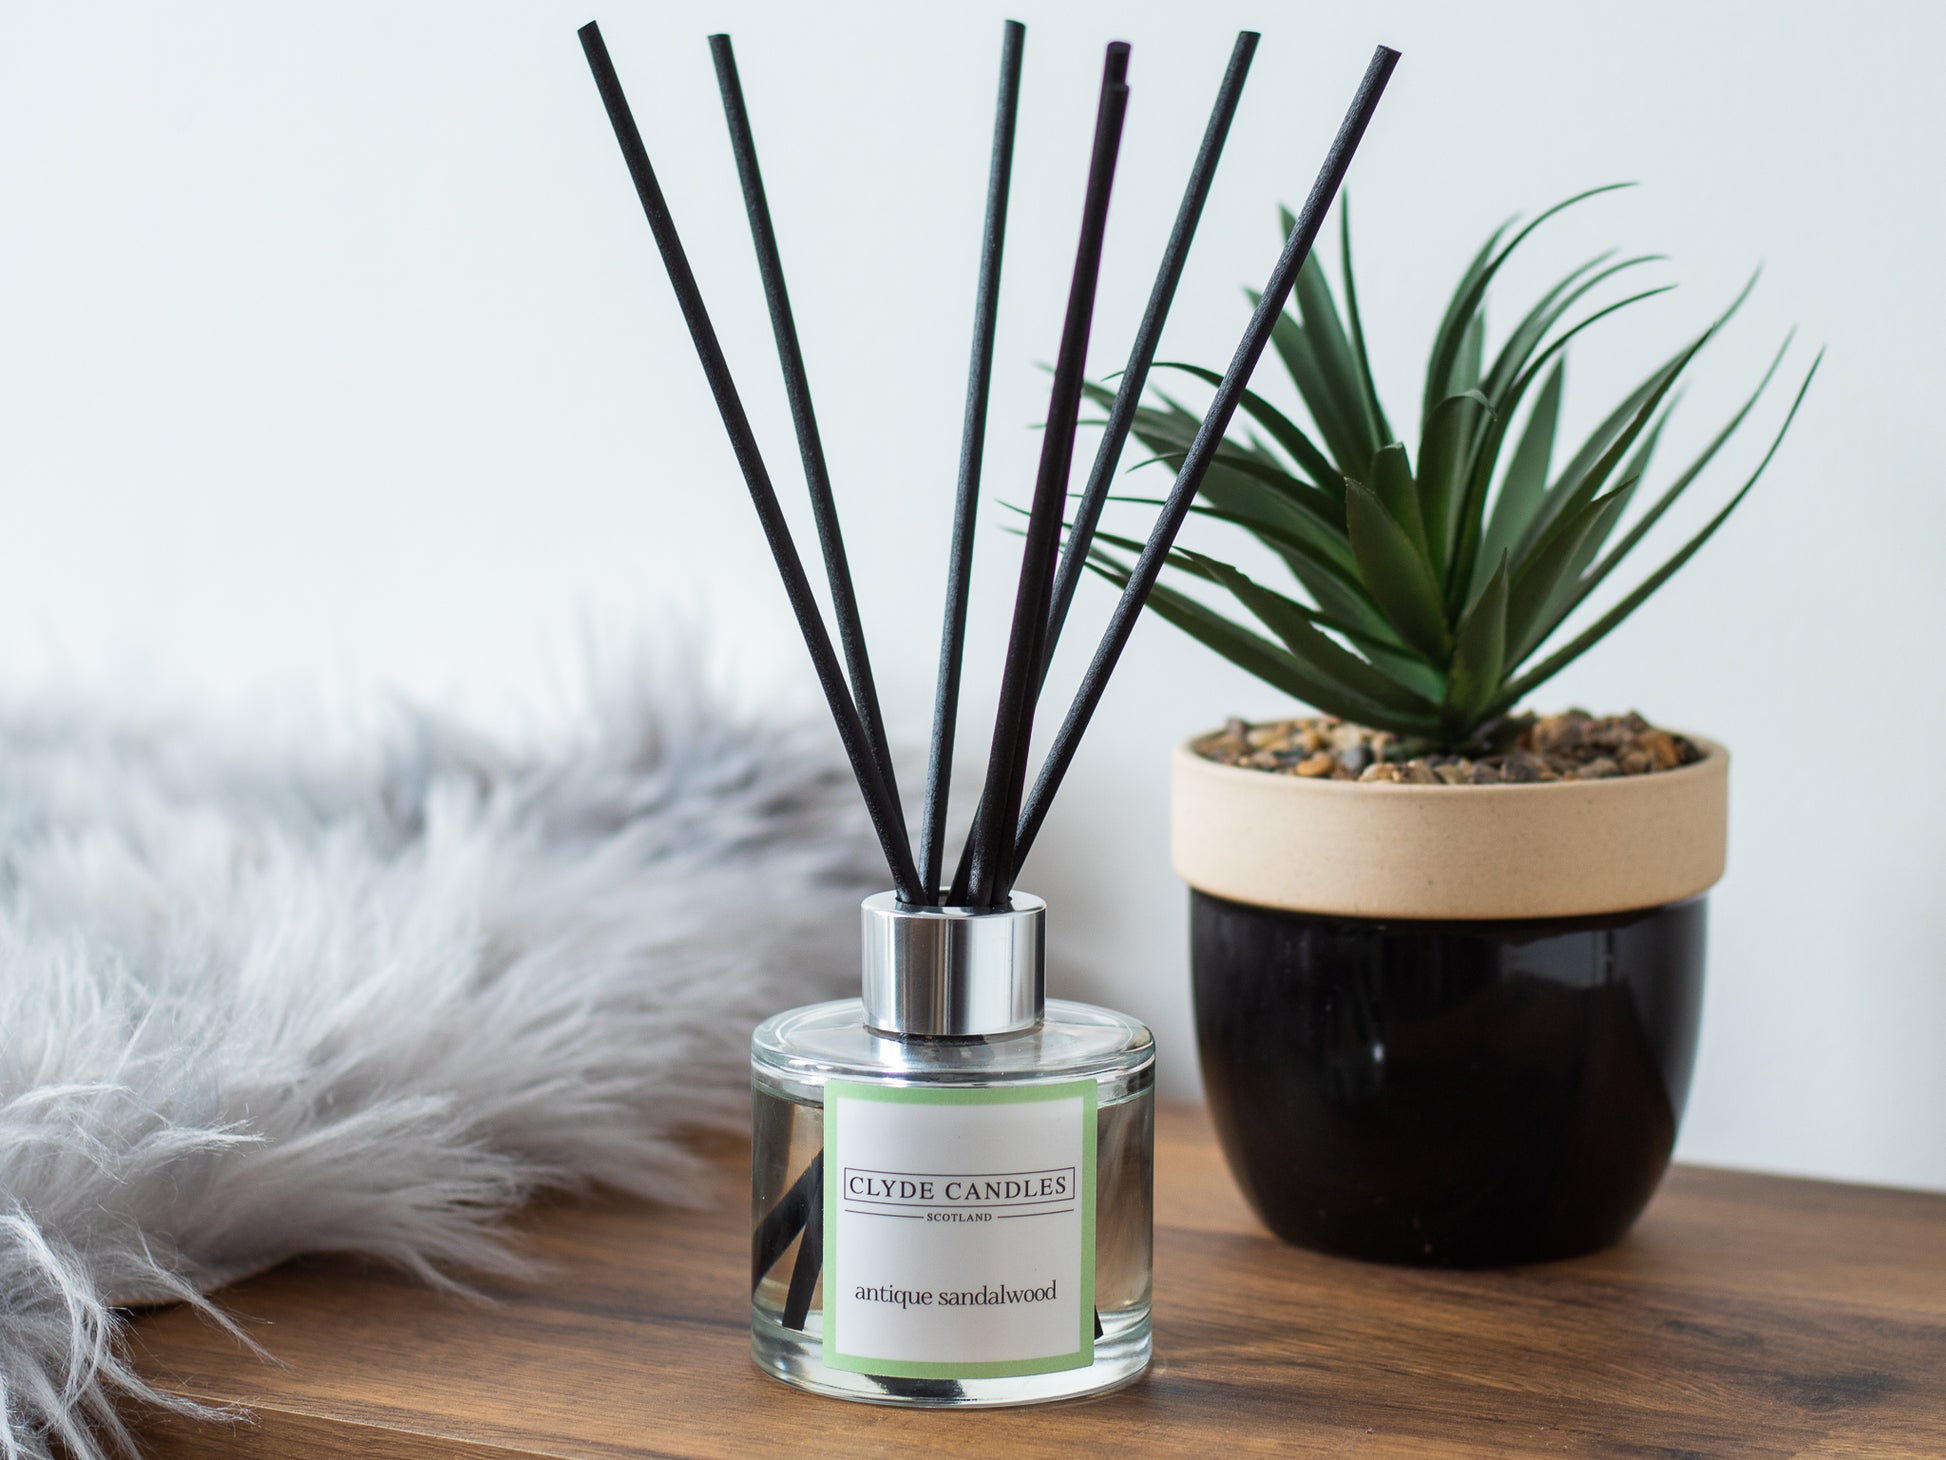 Antique Sandalwood Reed Diffuser - Clyde Candles, Luxury Diffuser Oil with a Set of 7 Fibre Sticks, 100ml, Best Aroma Scent for Home, Kitchen, Living Room, Bathroom. Fragrance Diffusers set with sticks